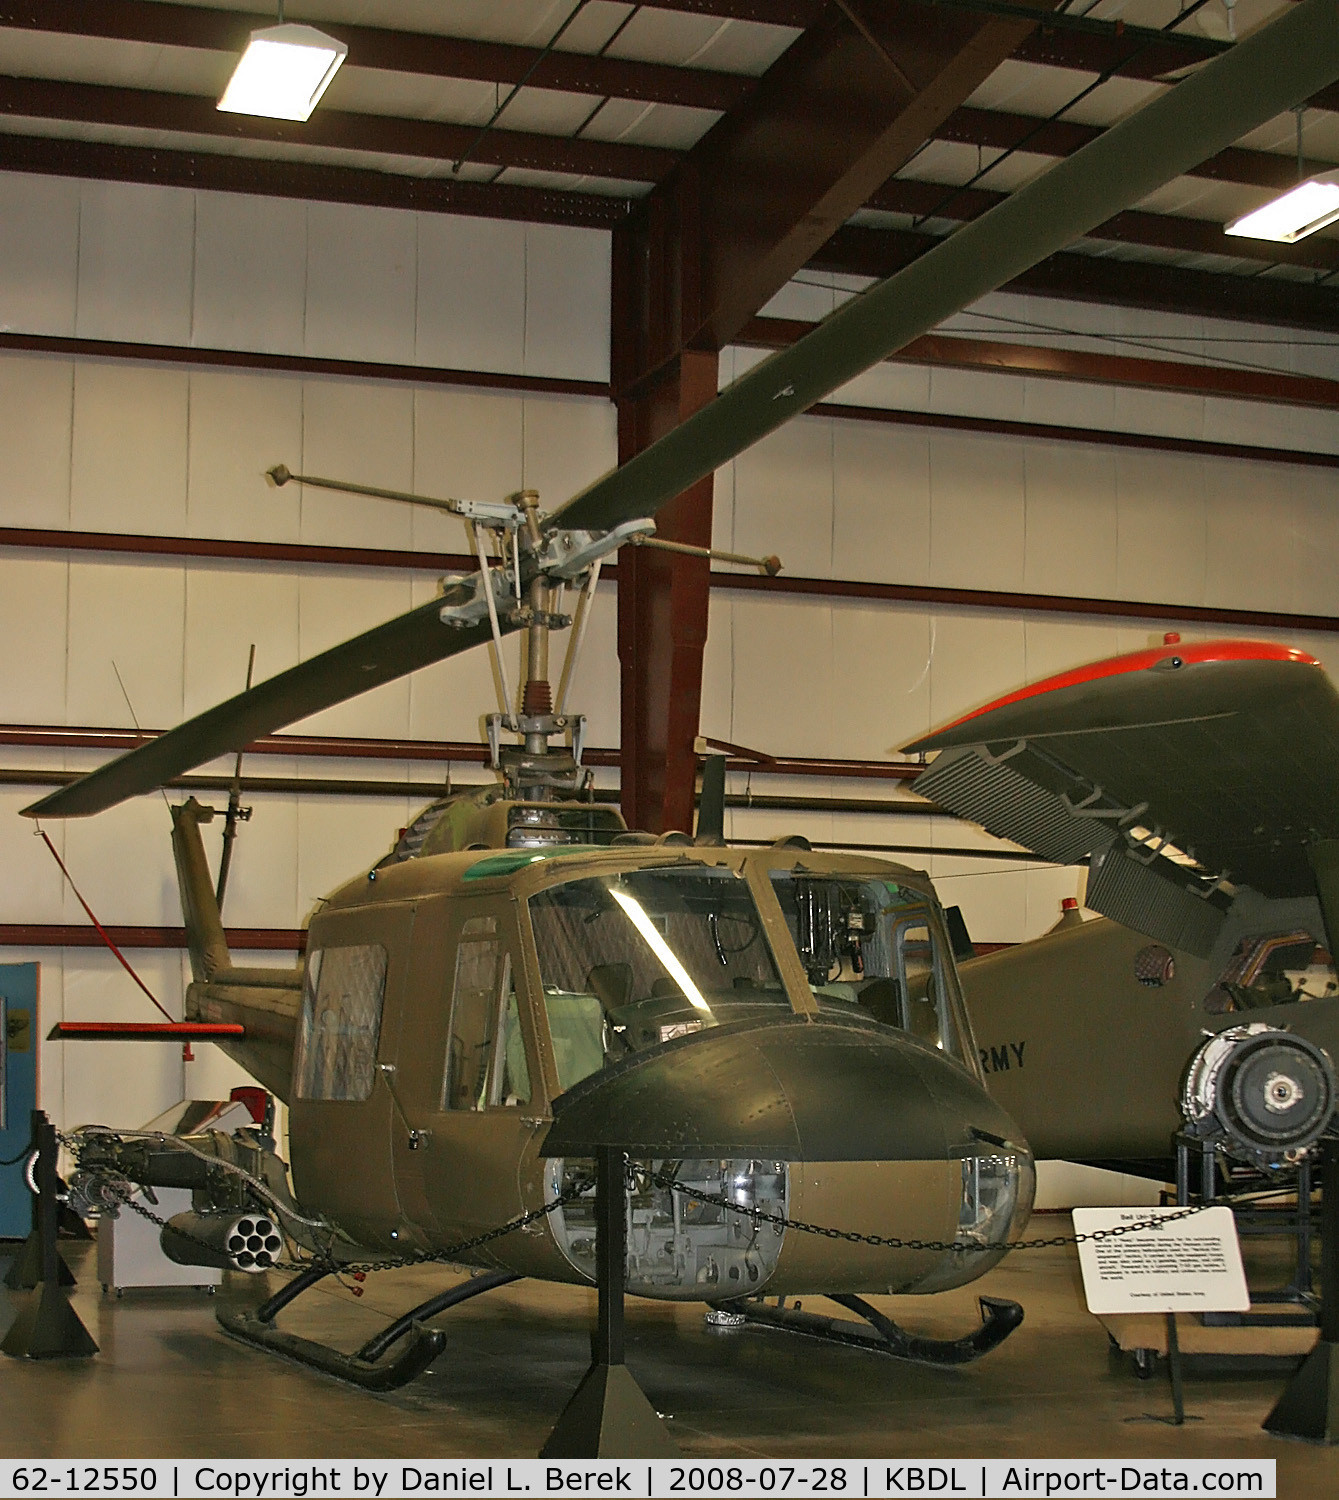 62-12550, 1962 Bell UH-1B Iroquois C/N 708, Having served in Vietnam, this helicopter has earned retirement at the New England Air Museum.